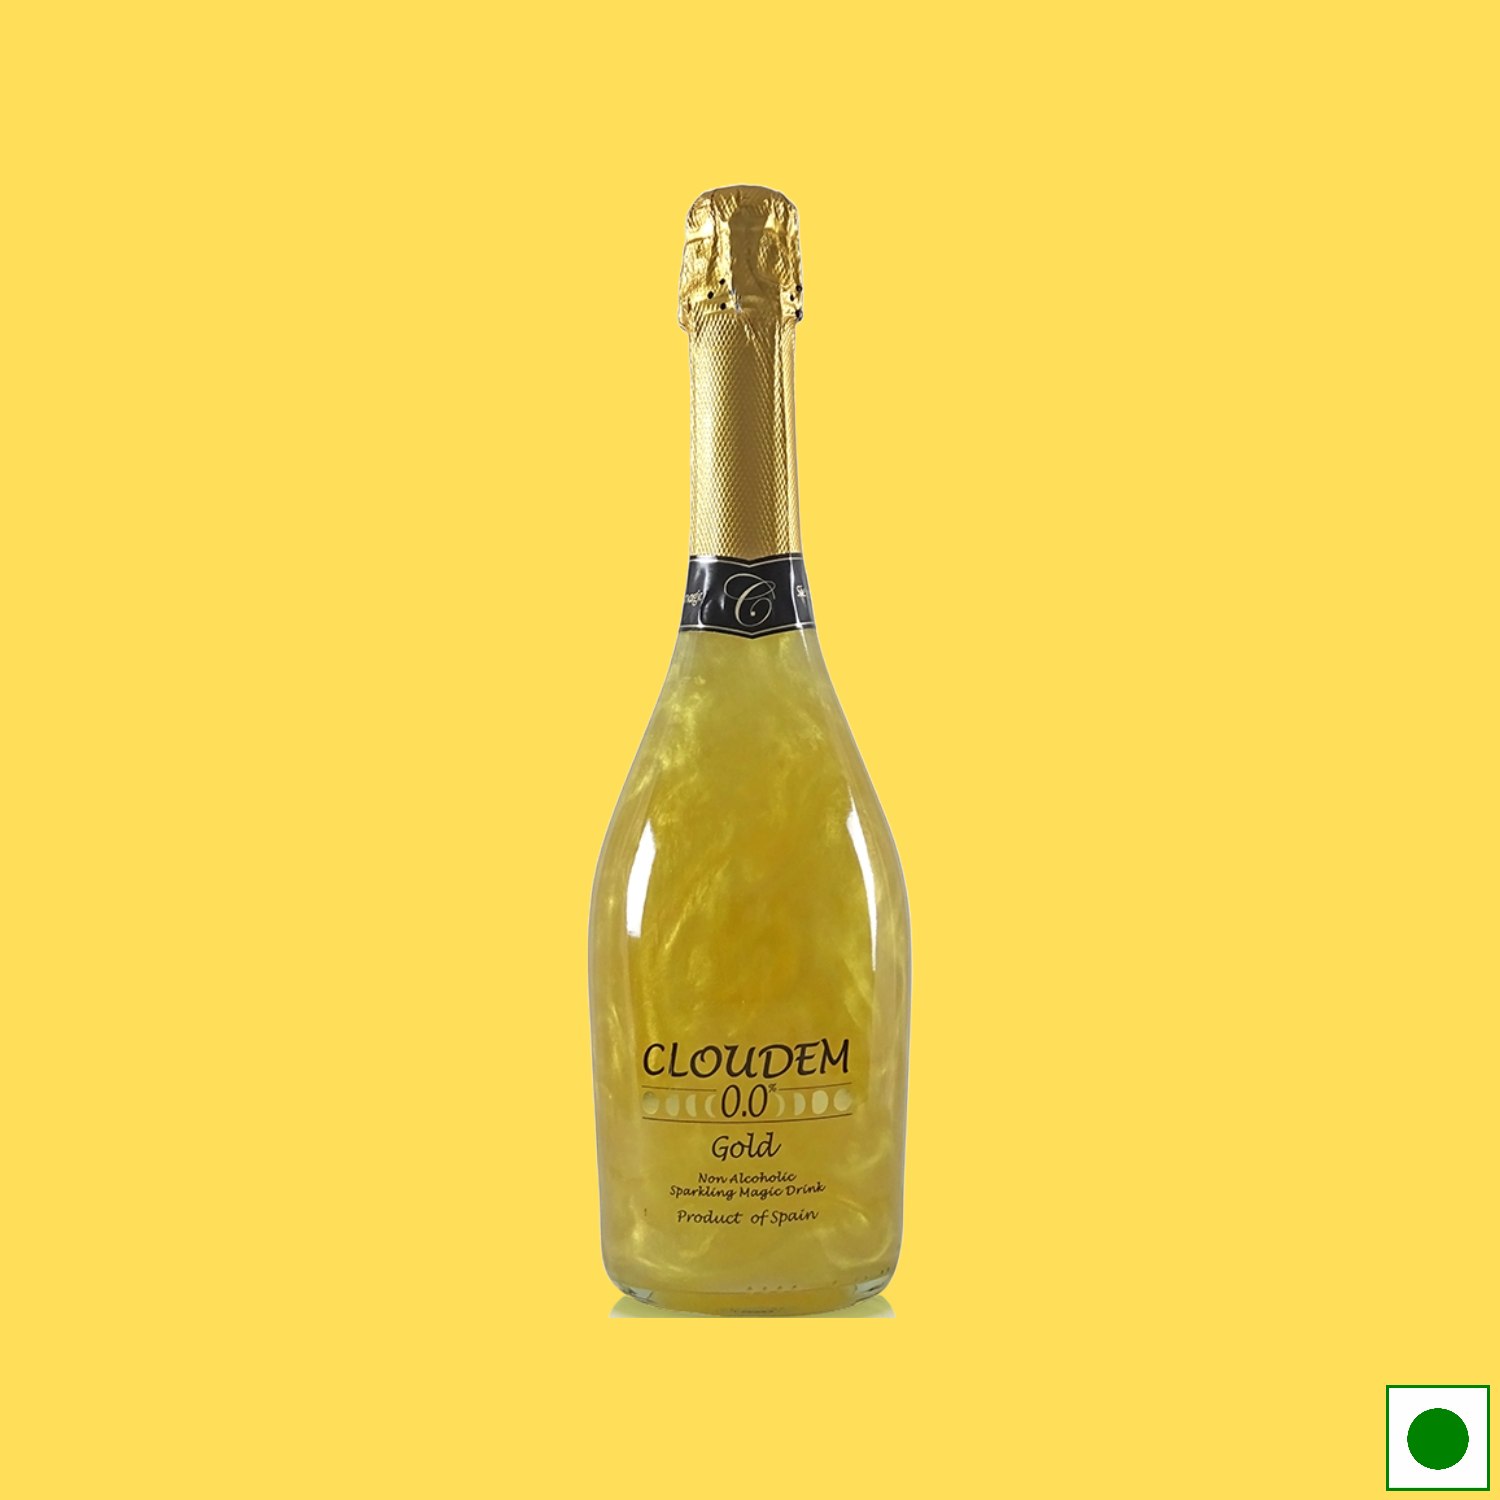 Cloudem Gold 0.0  Sparkling Magic Drink, 750ml (Imported)